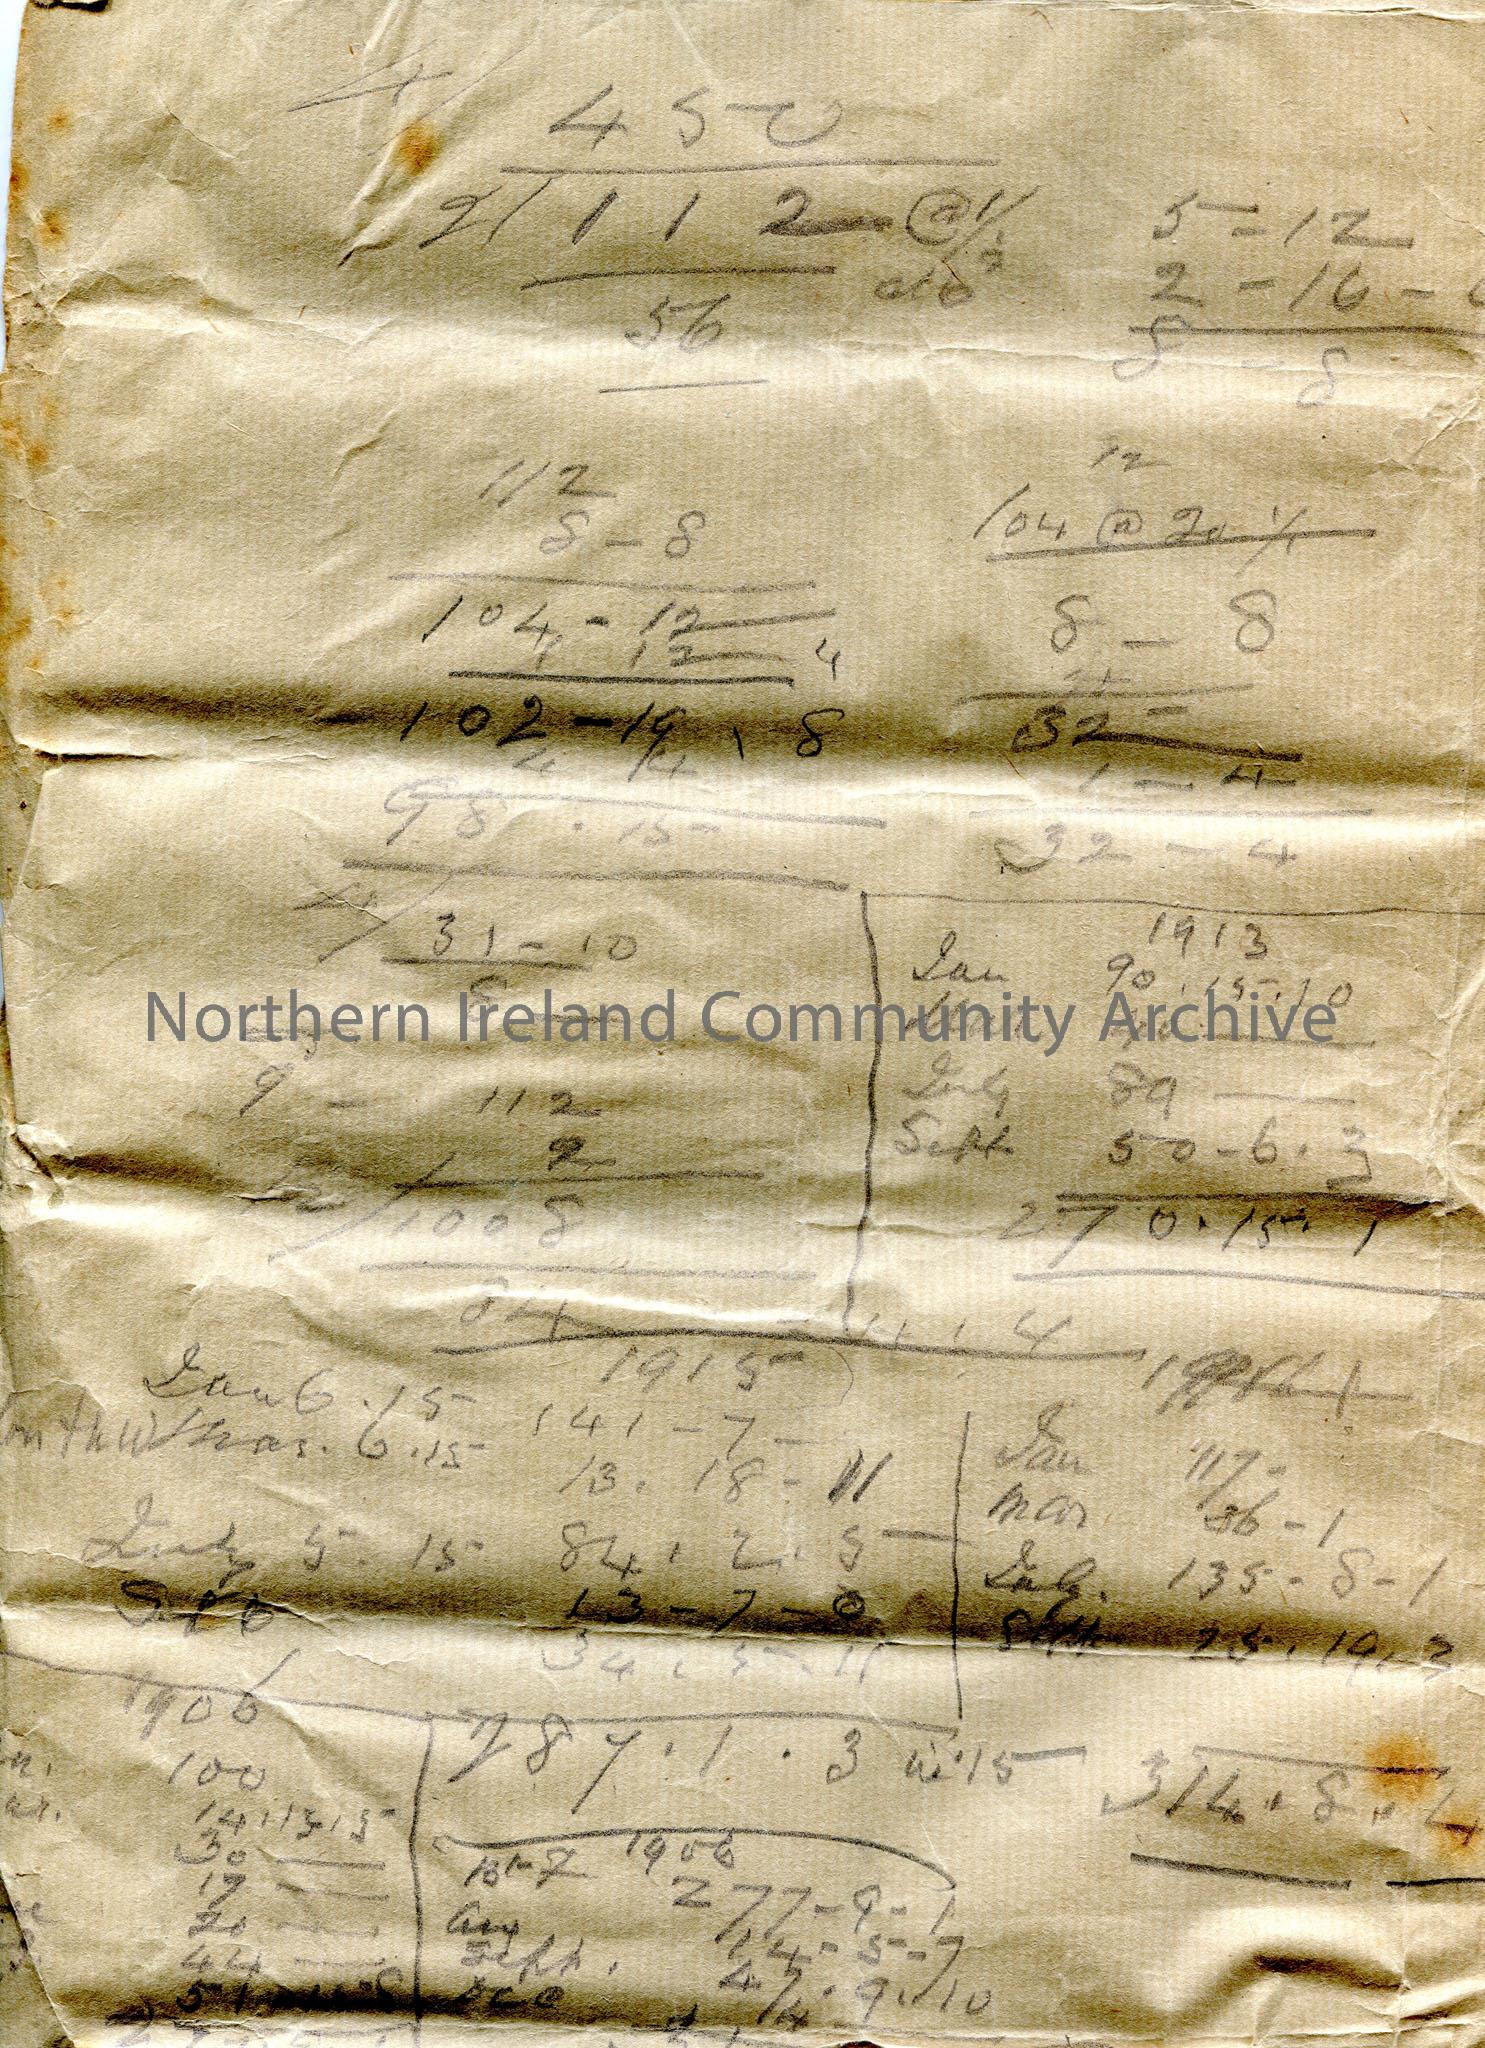 Page of handwritten rough calculations in pencil. Notes are written on the back of possibly parcel packaging which has ‘The Queen’ Windsor House, Brea… – scan265b